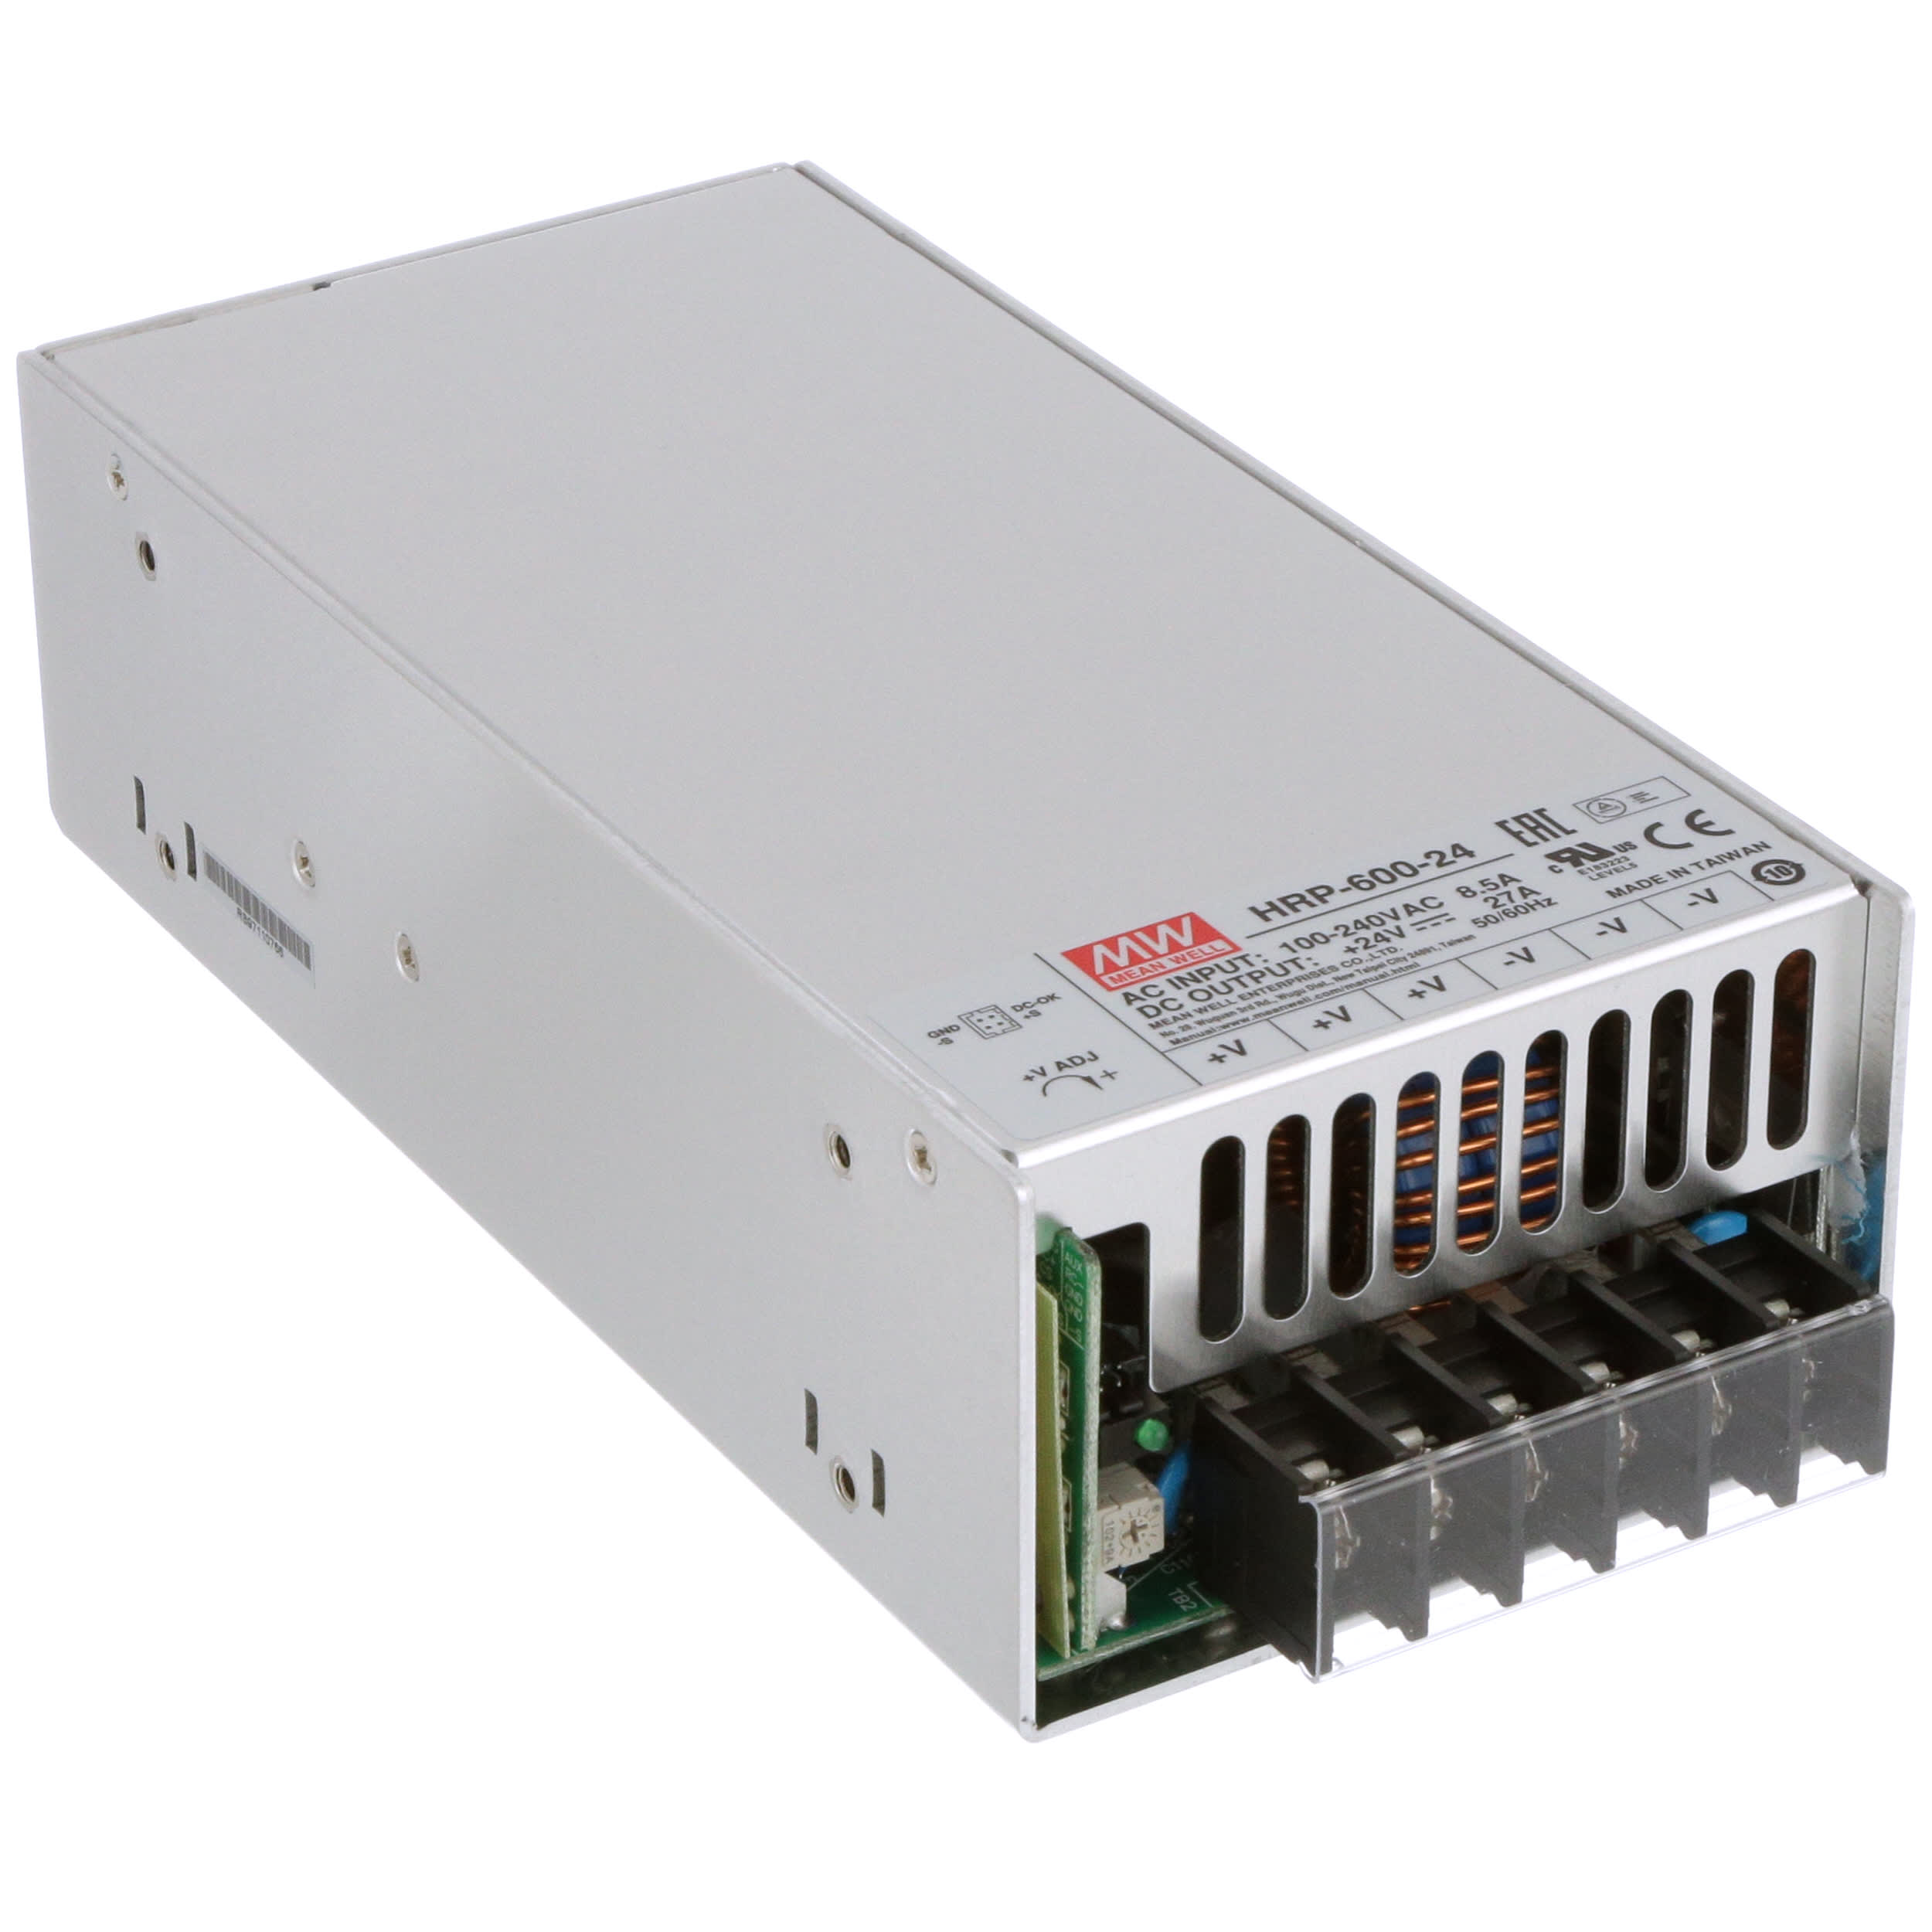 Mean Well HRP-600-24 Switching Power Supply 648W 24V 27A, Active PFC,  Enclosed, Adj Output, Input: 85~264 VAC, 120~370 VDC